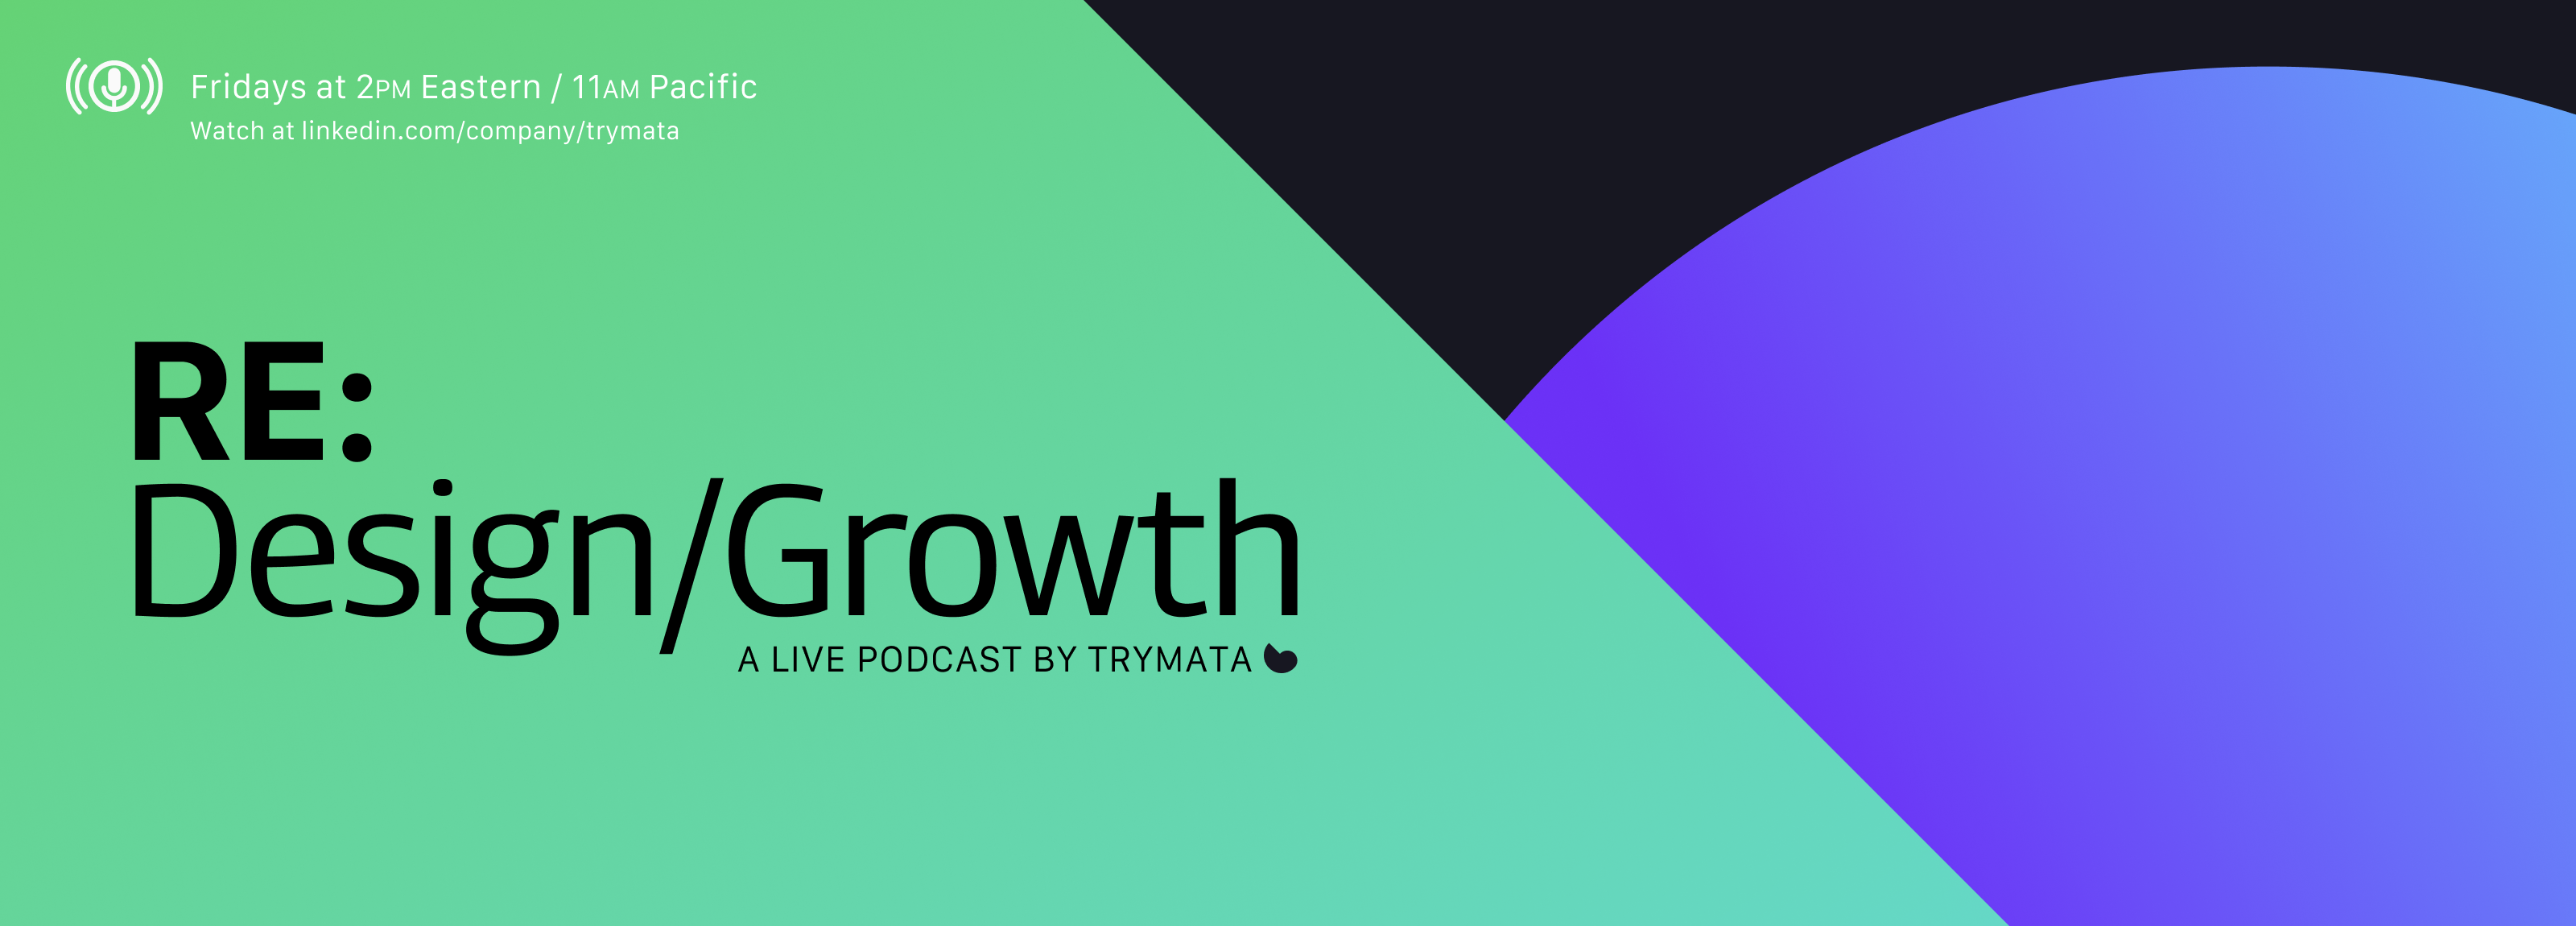 Re:Design/Growth podcast cover image